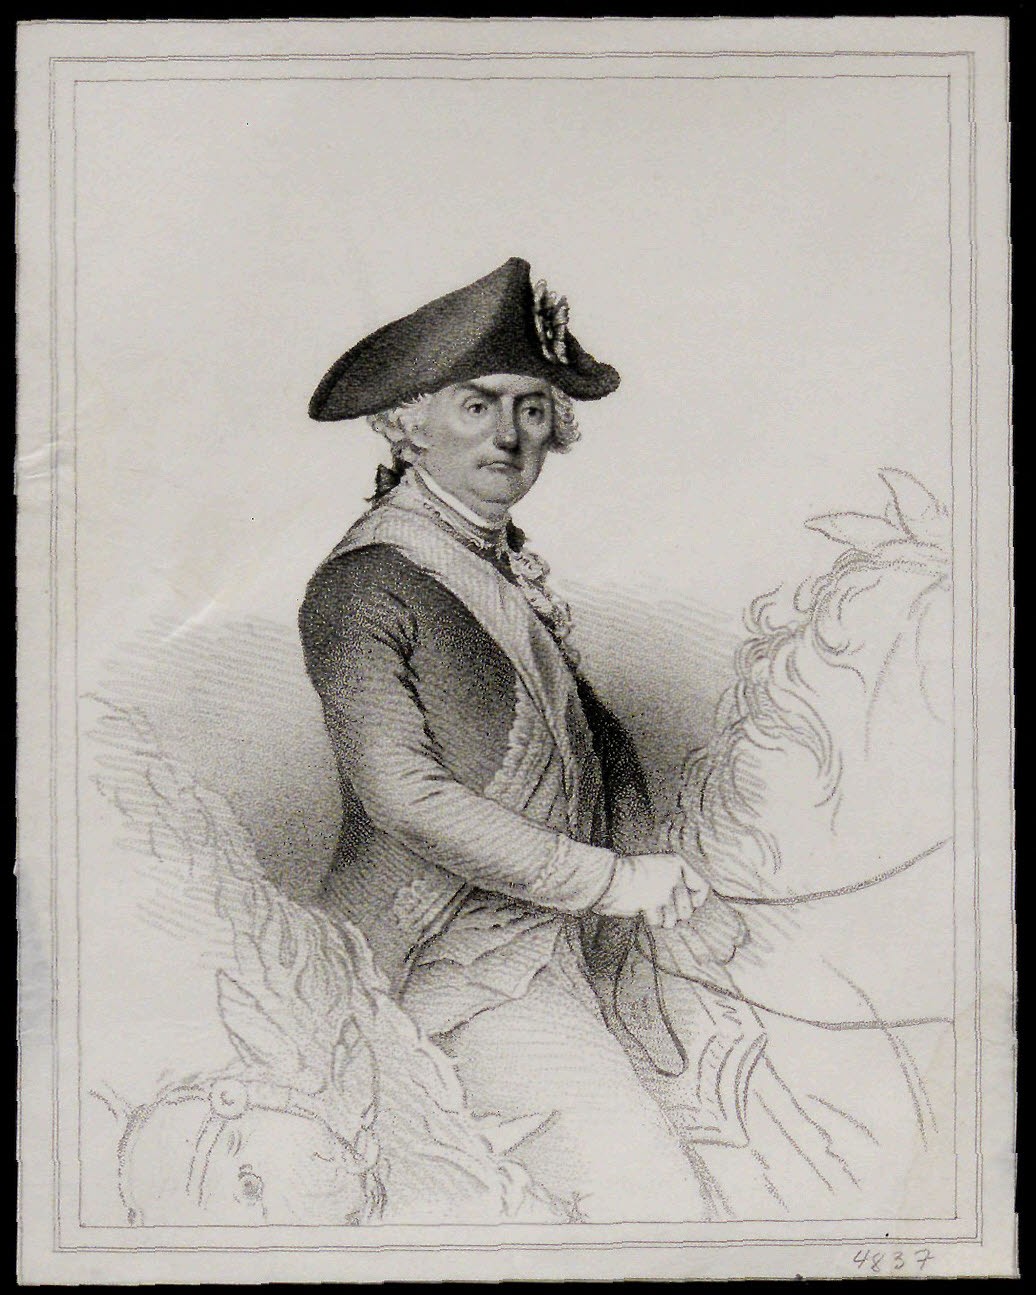 Print of General John Rochambeau on horseback. Rochambeau was a French ally to the American cause and a key figure in the Battle of Yorktown. Artist and date of creation unknown. (The Gilder Lehrman Institute, GLC04837.02)